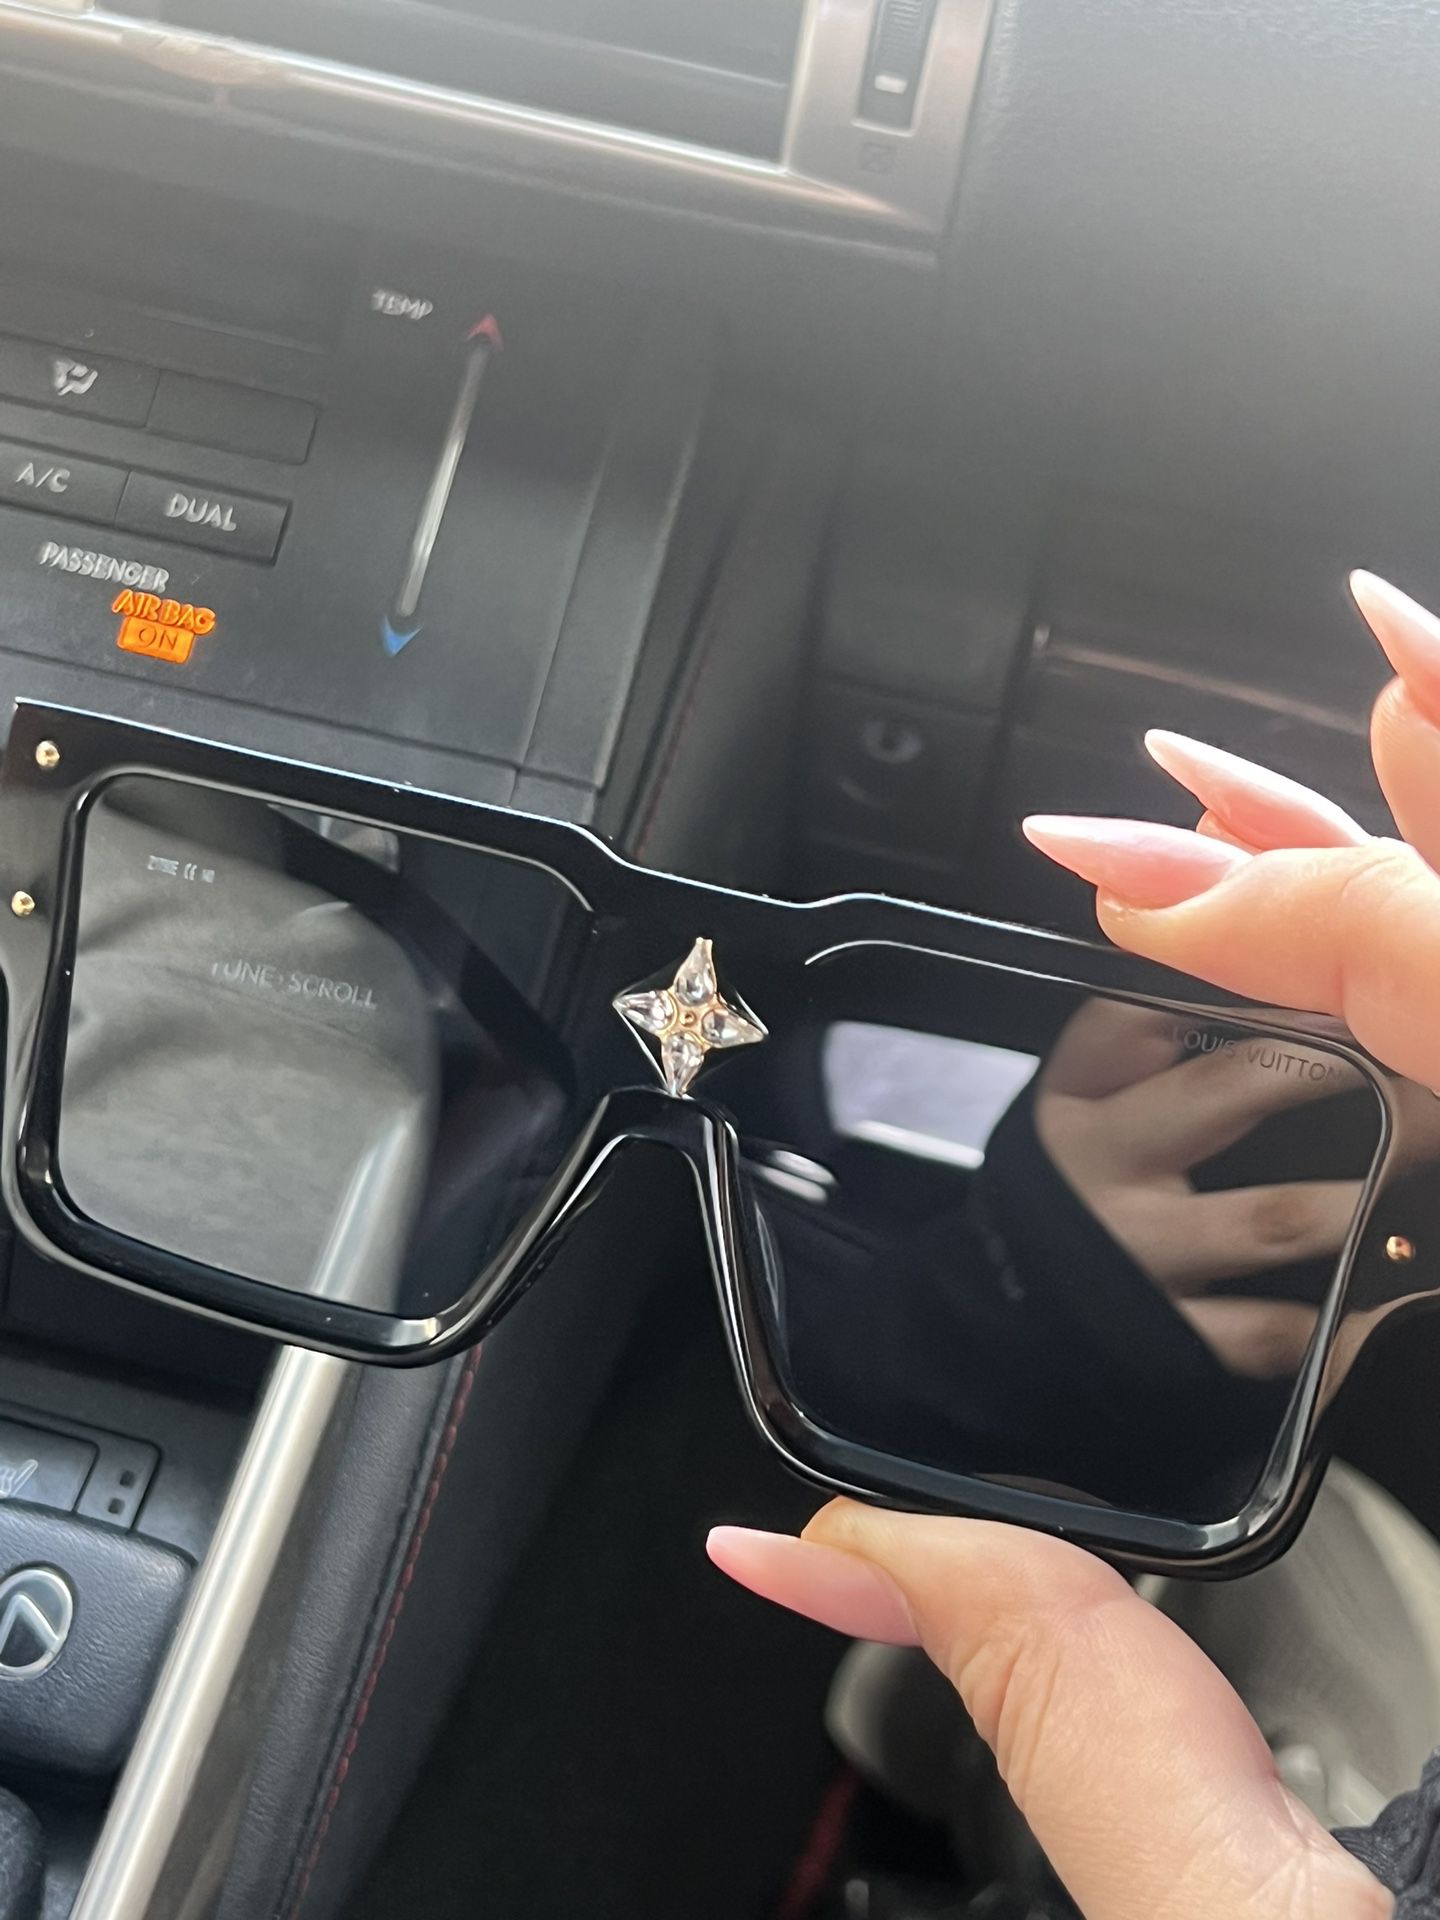 Louis Vuitton Cyclone Glasses for Sale in Humble, TX - OfferUp